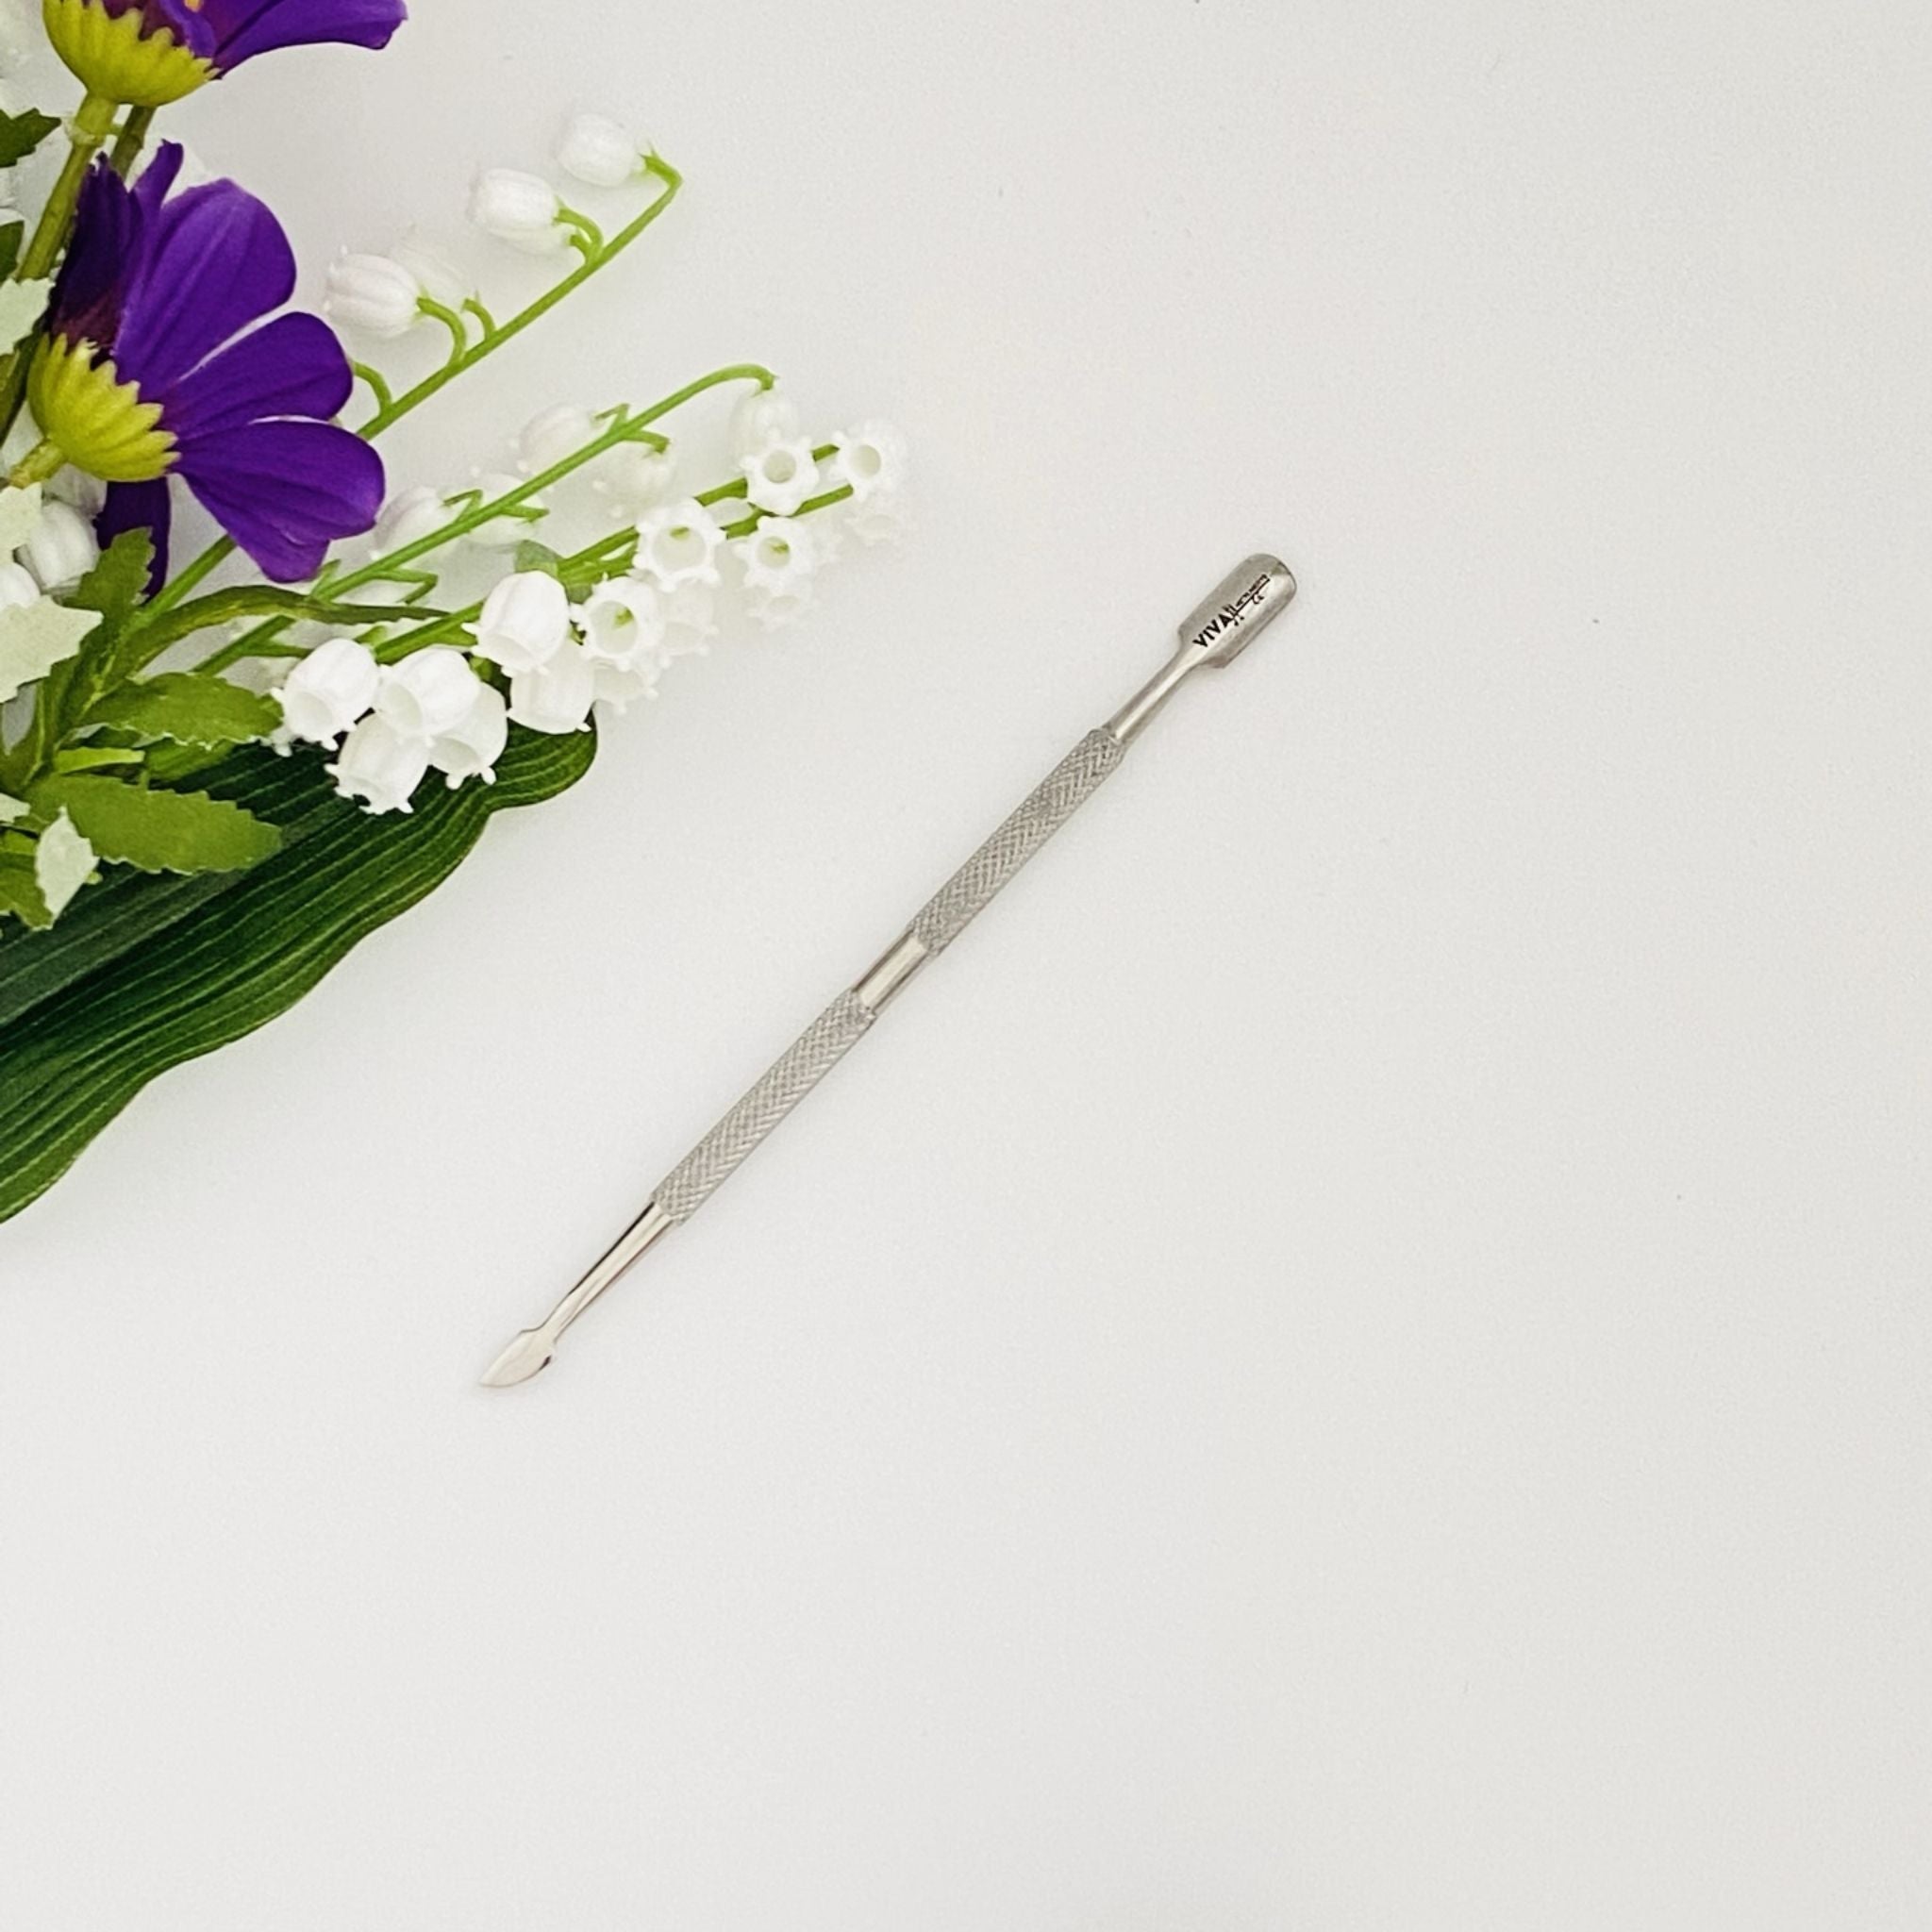 Manicure Tools - Cuticle Pusher & Cutter Double End | Manicure Tools